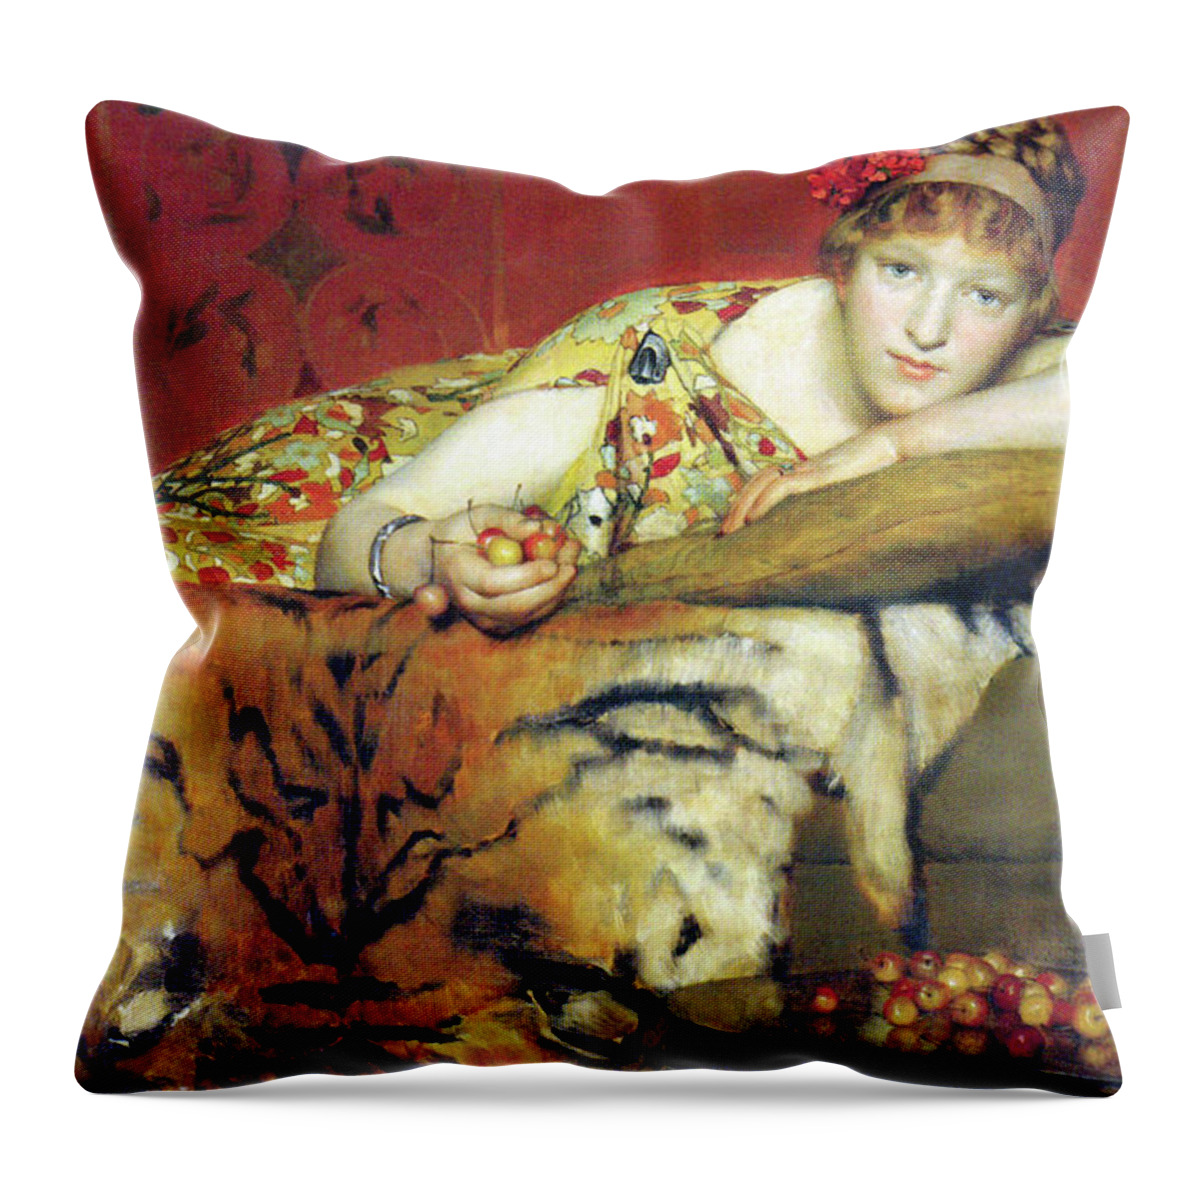 Alma-tadema Throw Pillow featuring the painting A Craving for Cherries by Alma-Tadema